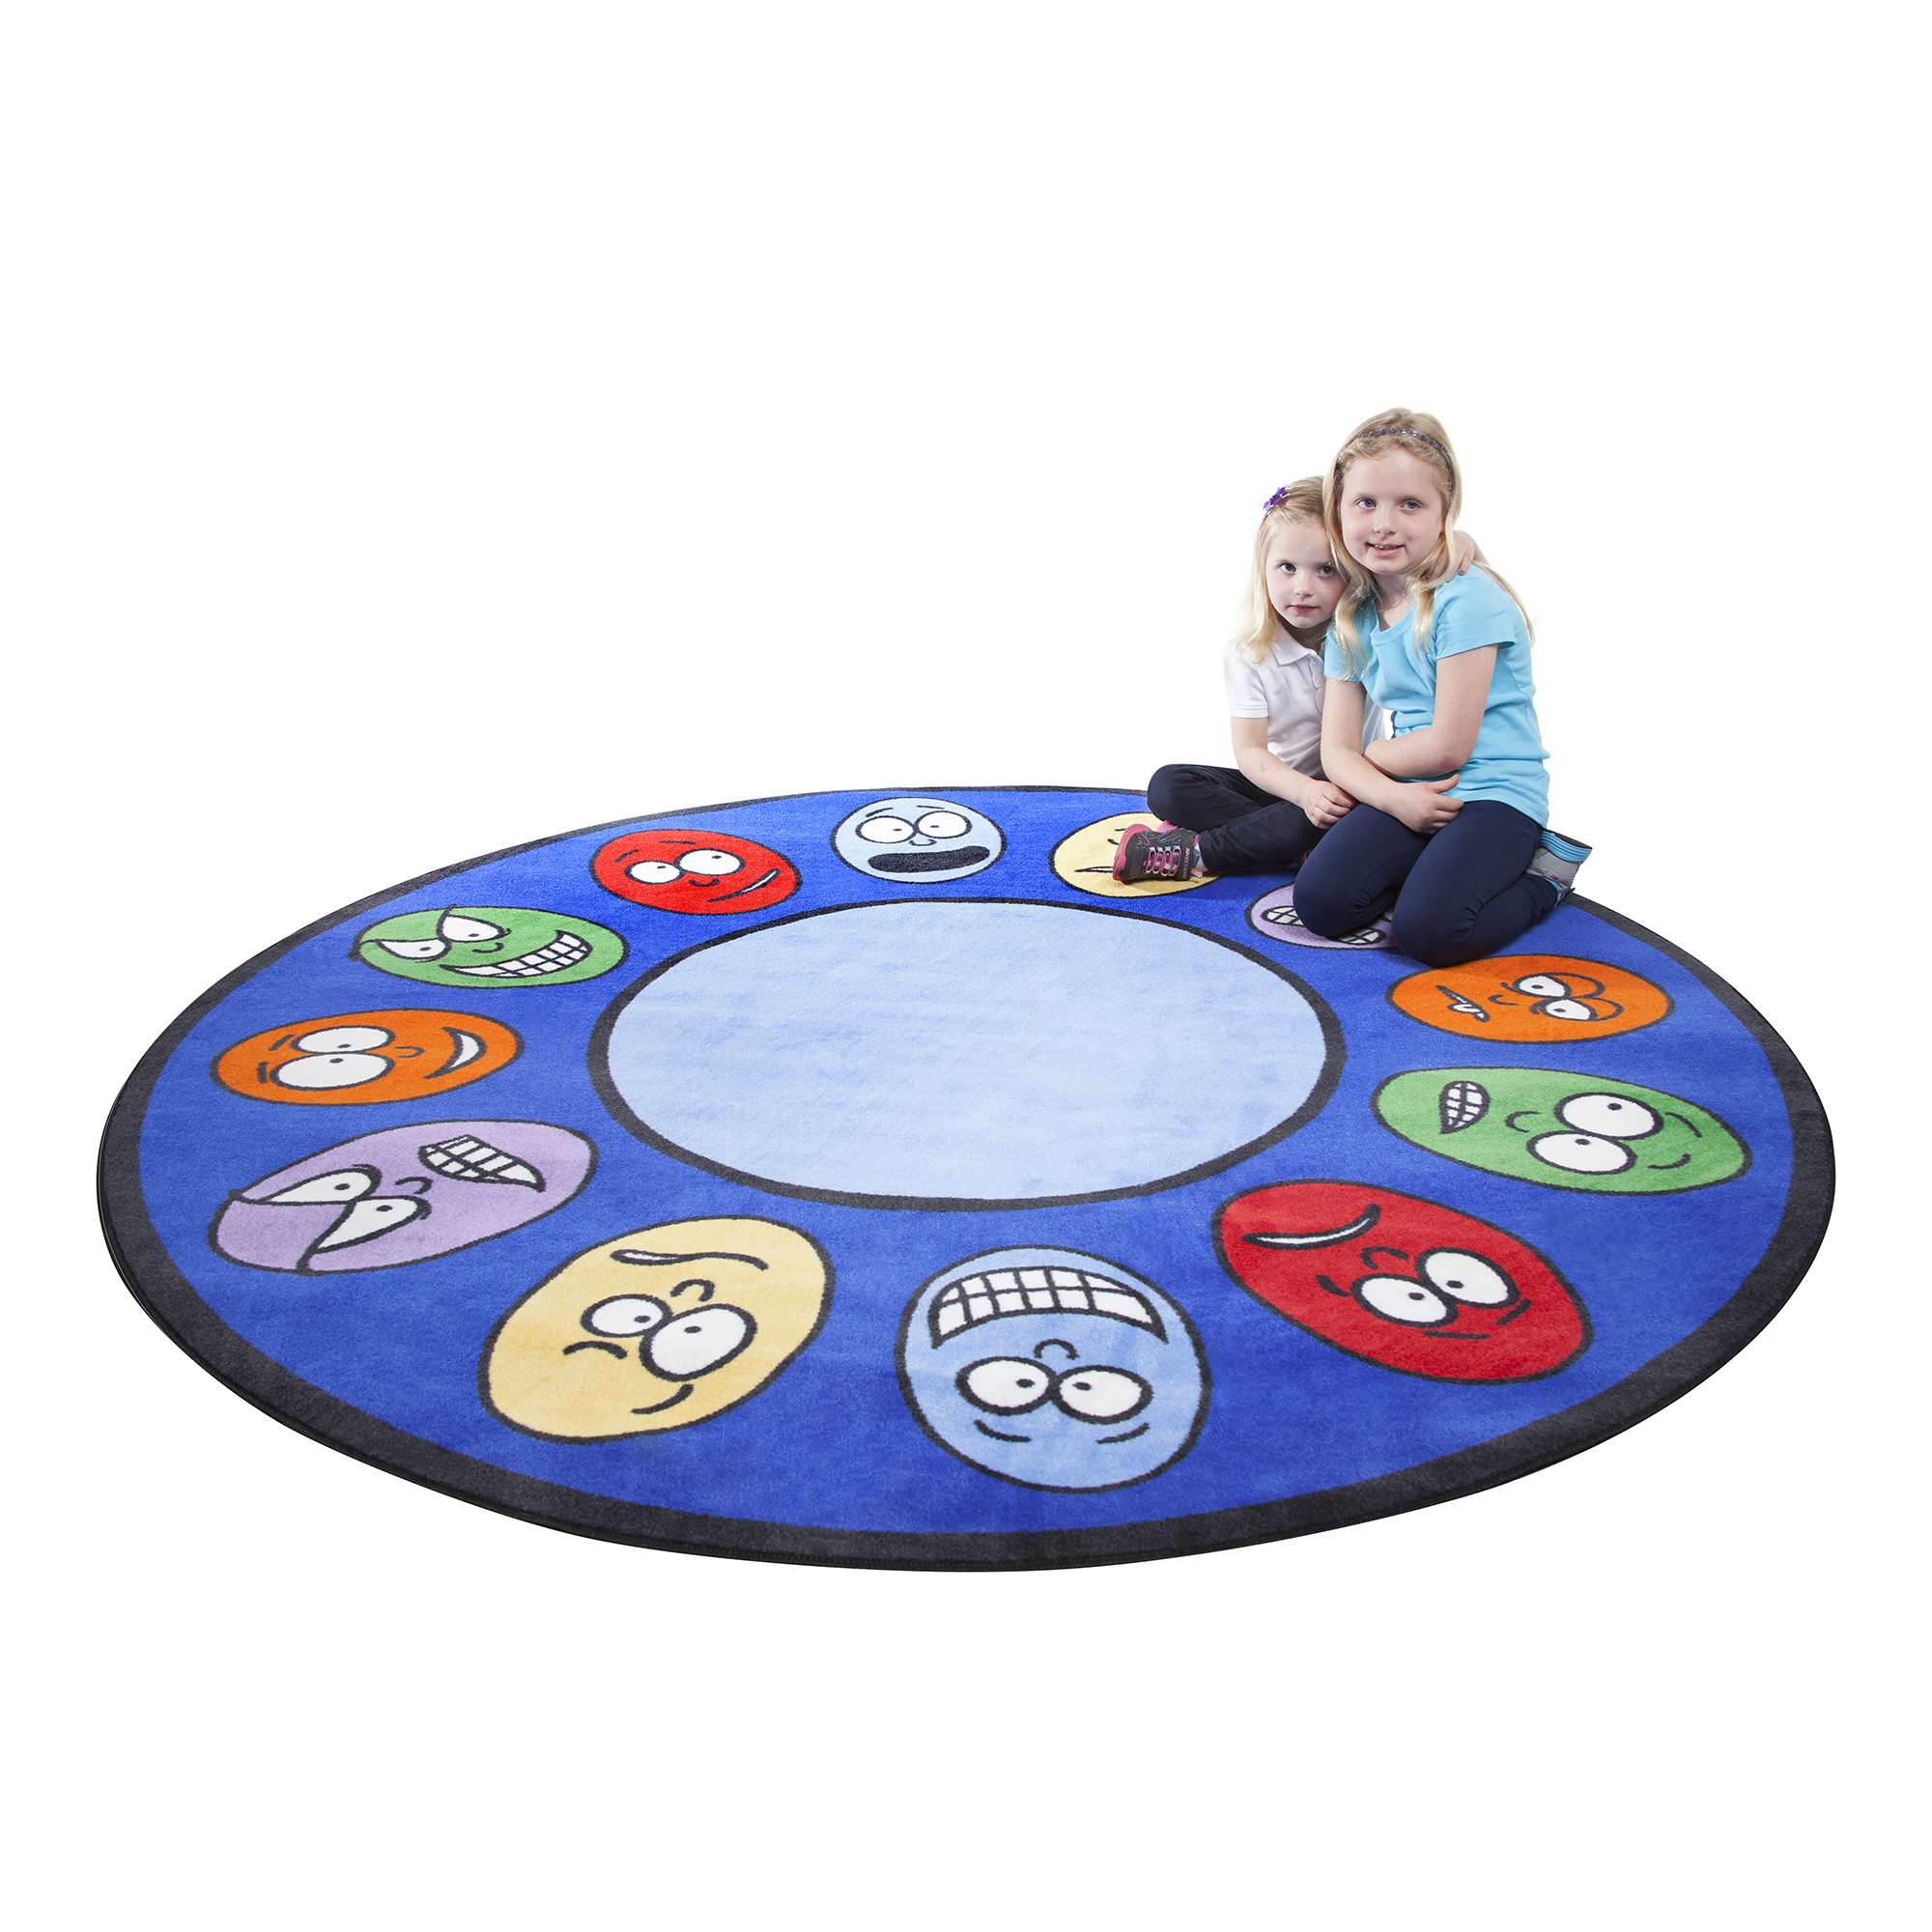 Expressions Rug - Large Round